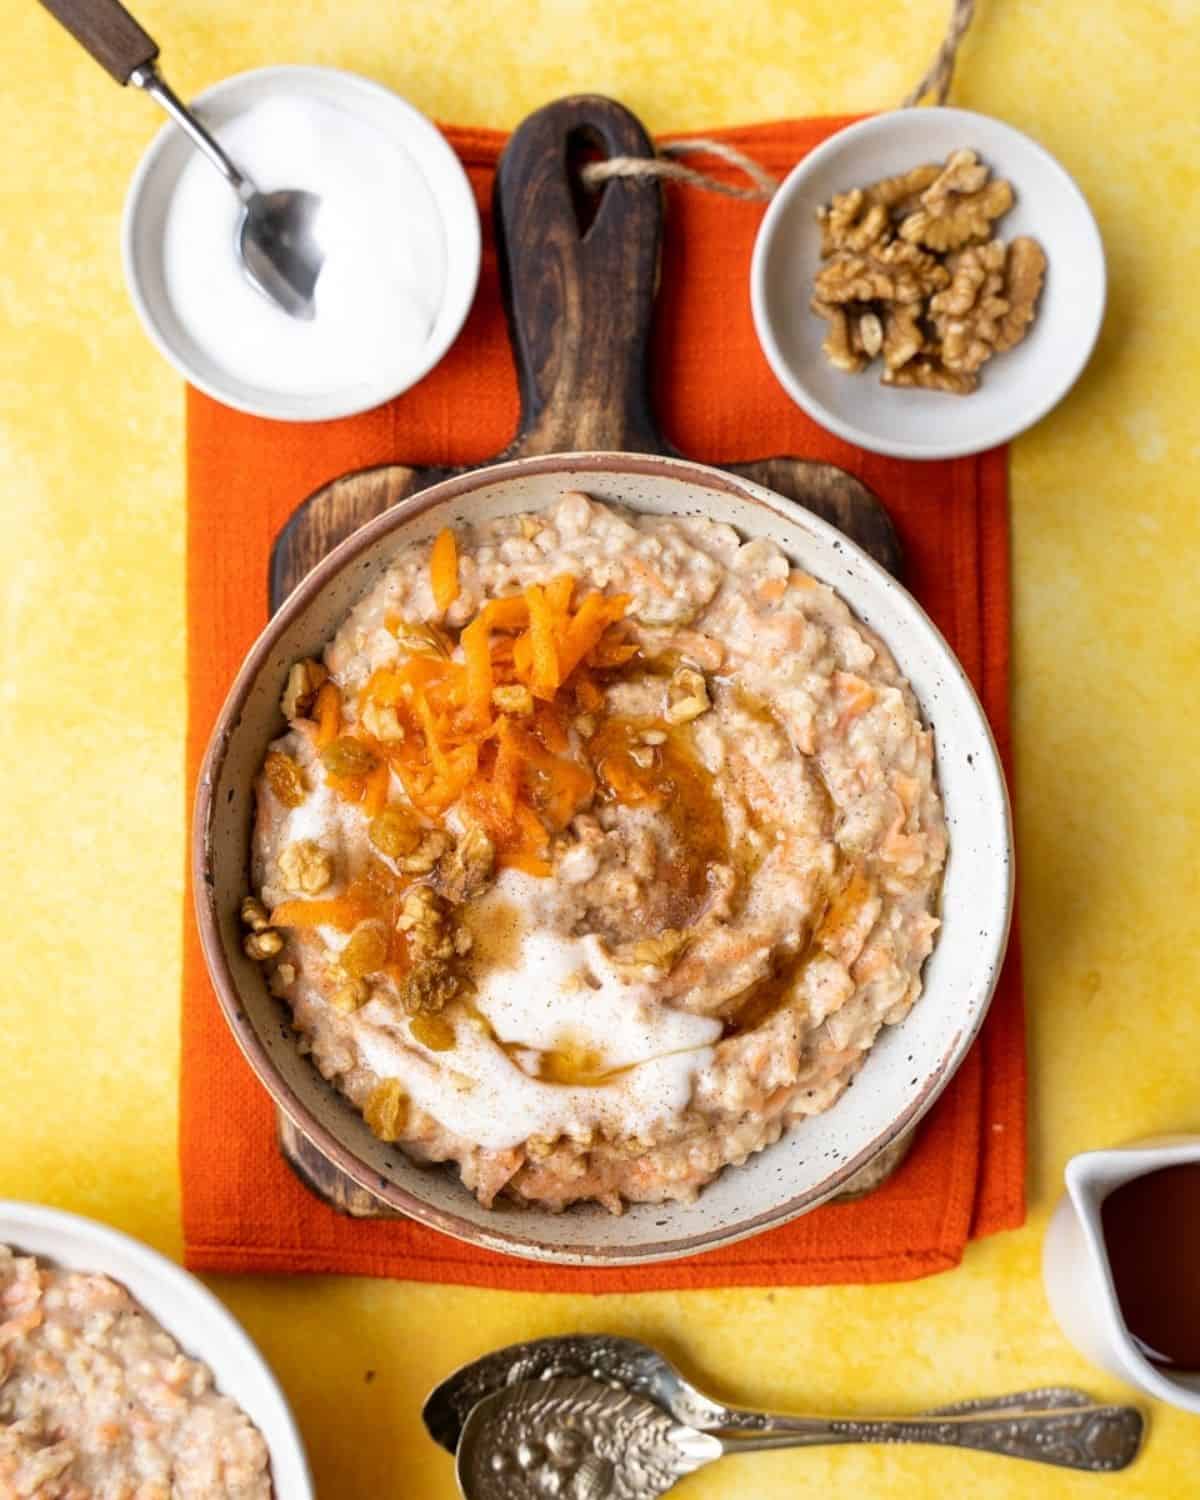 Porridge served with yoghurt, carrots and nuts with spoons.